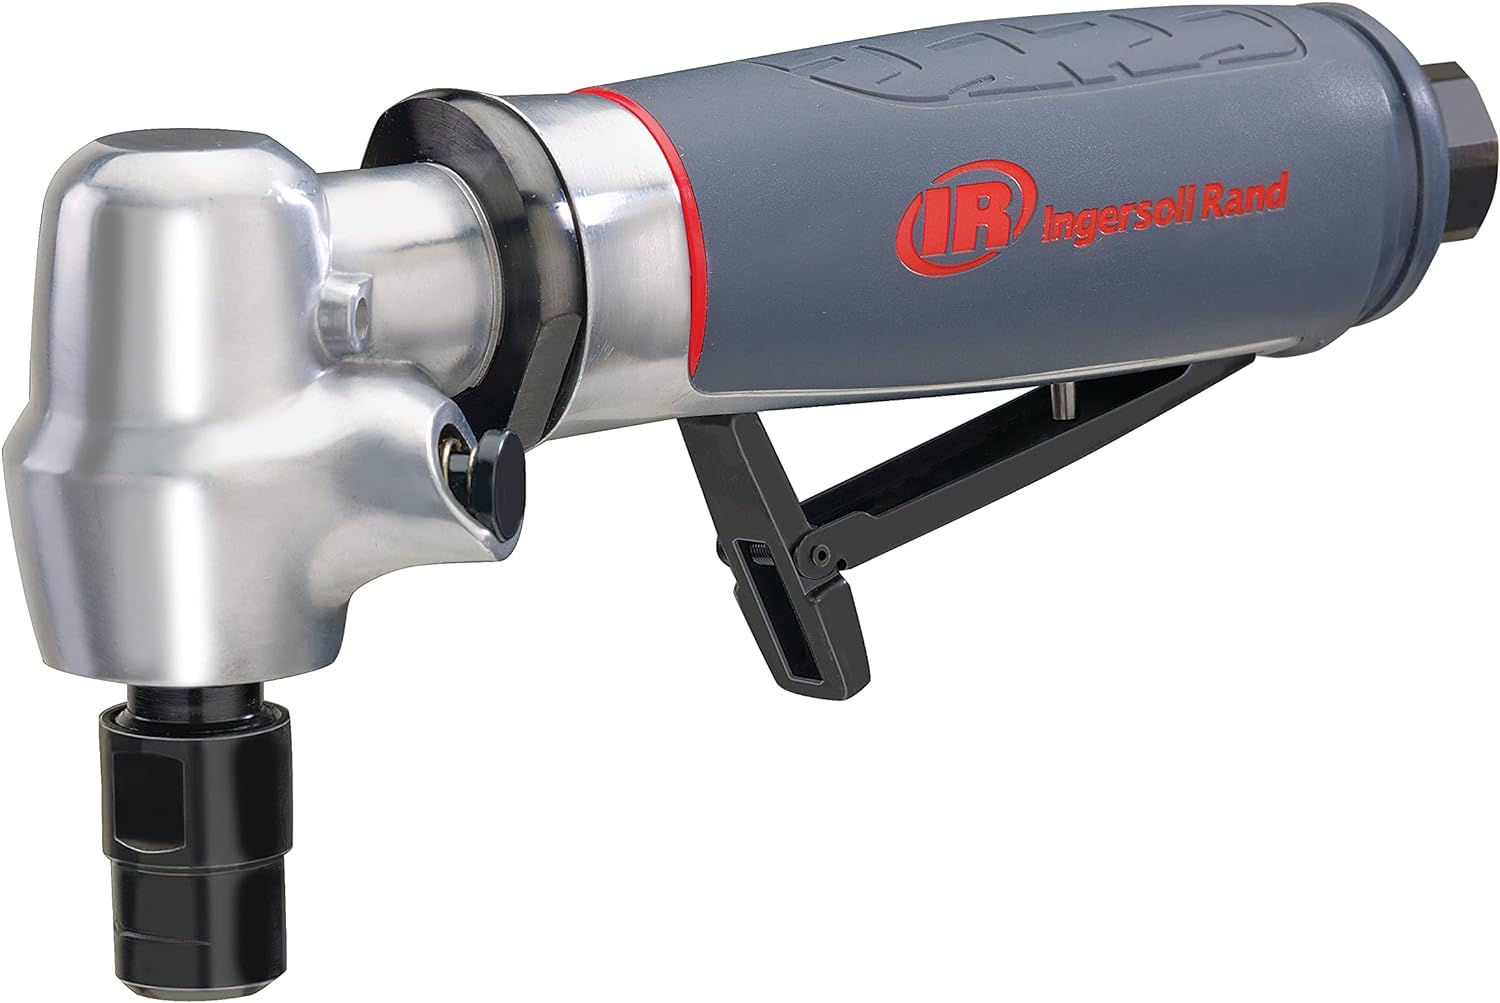 Ingersoll Rand 5102MAX Air Die Grinder – Right Angle, Ergonomic Grip, 0.4 HP and 20,000 RPM Motor, Lightweight Tool, Spindle Lock, Grey